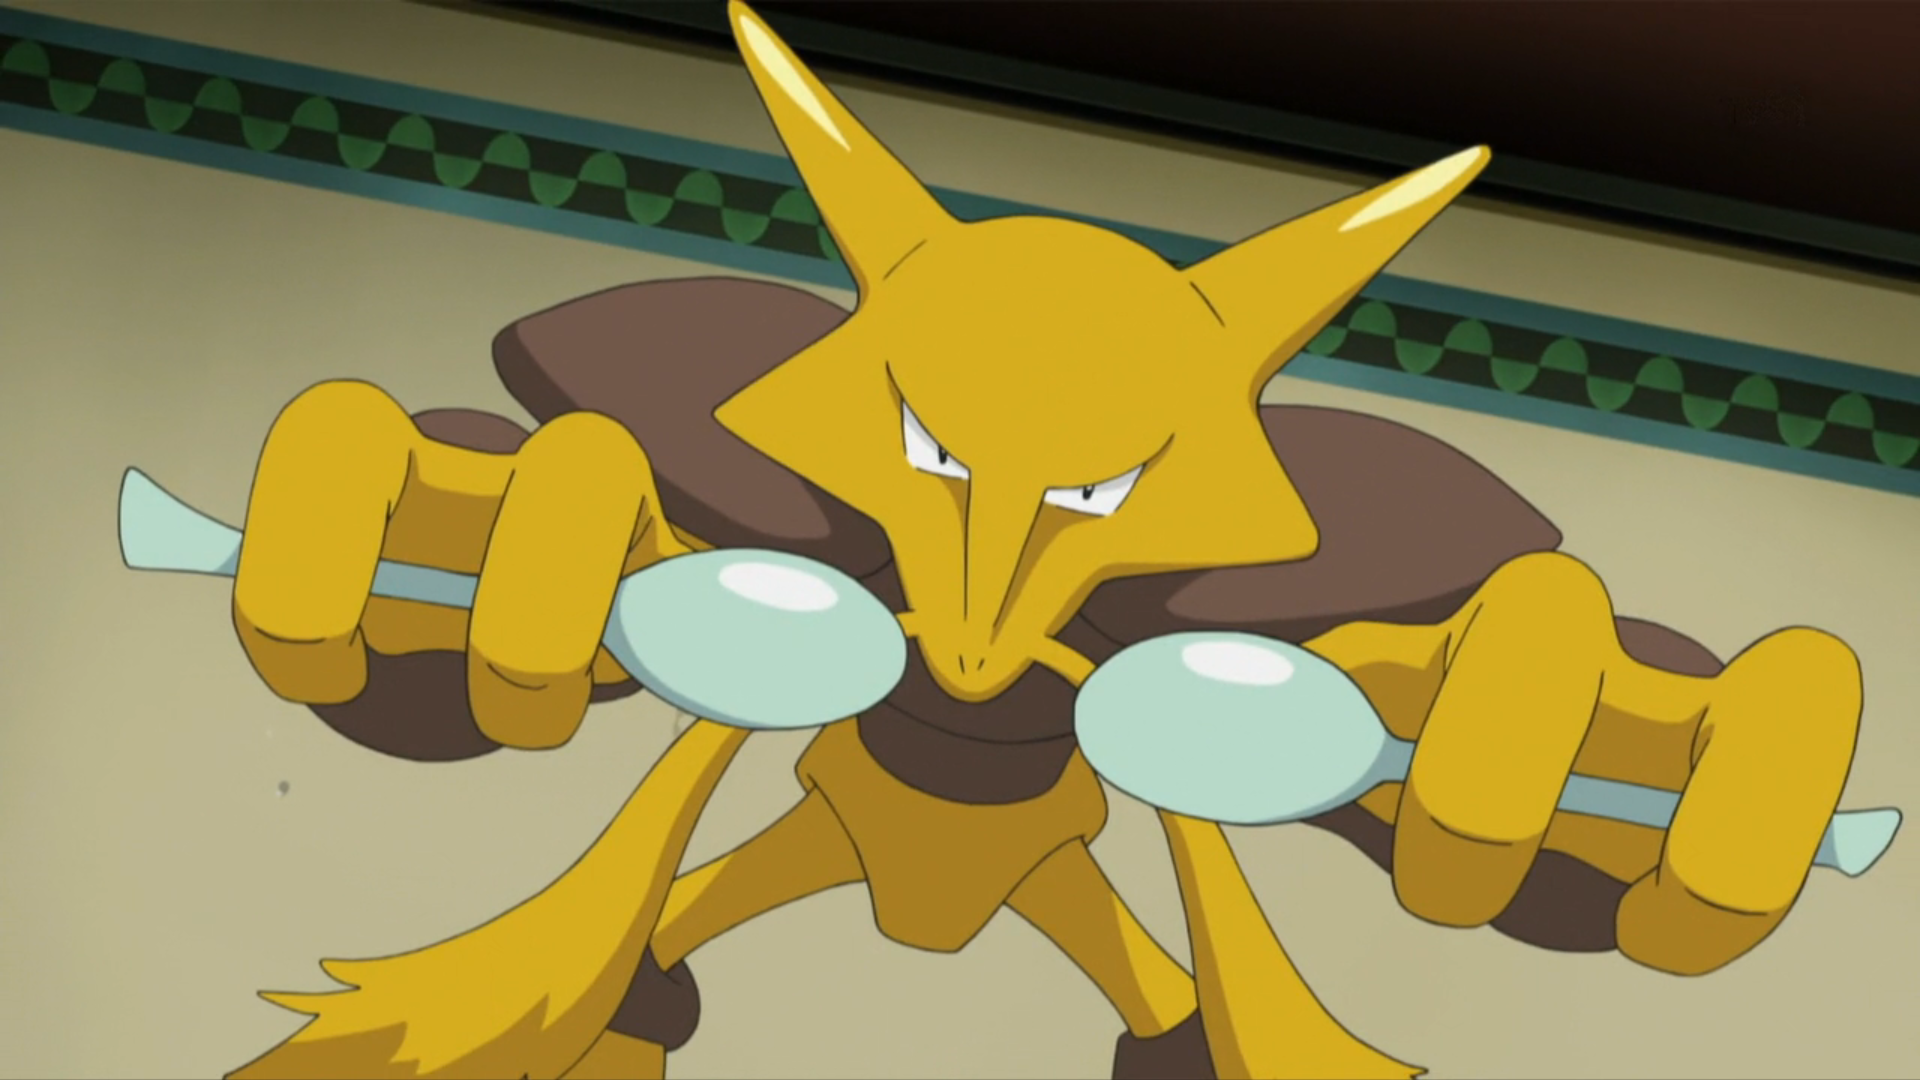 Alakazam is a Psychic type Pokemon introduced in Generation I. It evolves f...